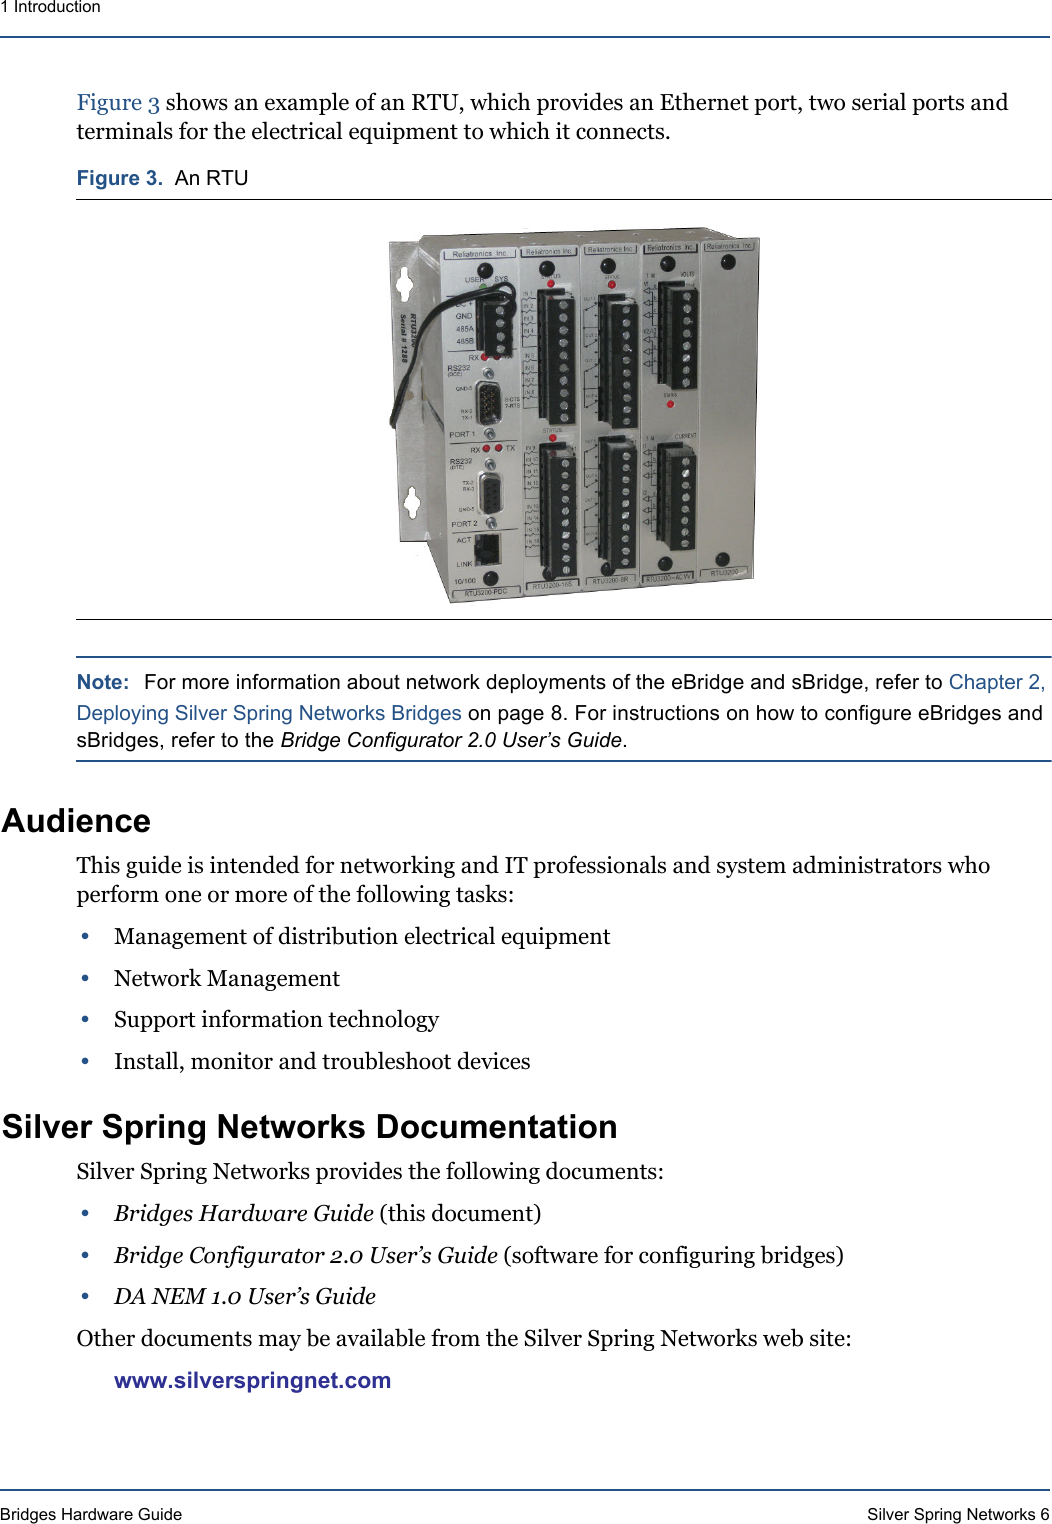 Bridges Hardware Guide Silver Spring Networks 61 IntroductionFigure 3 shows an example of an RTU, which provides an Ethernet port, two serial ports and terminals for the electrical equipment to which it connects.Note: For more information about network deployments of the eBridge and sBridge, refer to Chapter 2, Deploying Silver Spring Networks Bridges on page 8. For instructions on how to configure eBridges and sBridges, refer to the Bridge Configurator 2.0 User’s Guide.AudienceThis guide is intended for networking and IT professionals and system administrators who perform one or more of the following tasks:•Management of distribution electrical equipment•Network Management•Support information technology•Install, monitor and troubleshoot devicesSilver Spring Networks DocumentationSilver Spring Networks provides the following documents:•Bridges Hardware Guide (this document)•Bridge Configurator 2.0 User’s Guide (software for configuring bridges)•DA NEM 1.0 User’s GuideOther documents may be available from the Silver Spring Networks web site:www.silverspringnet.comFigure 3.  An RTU